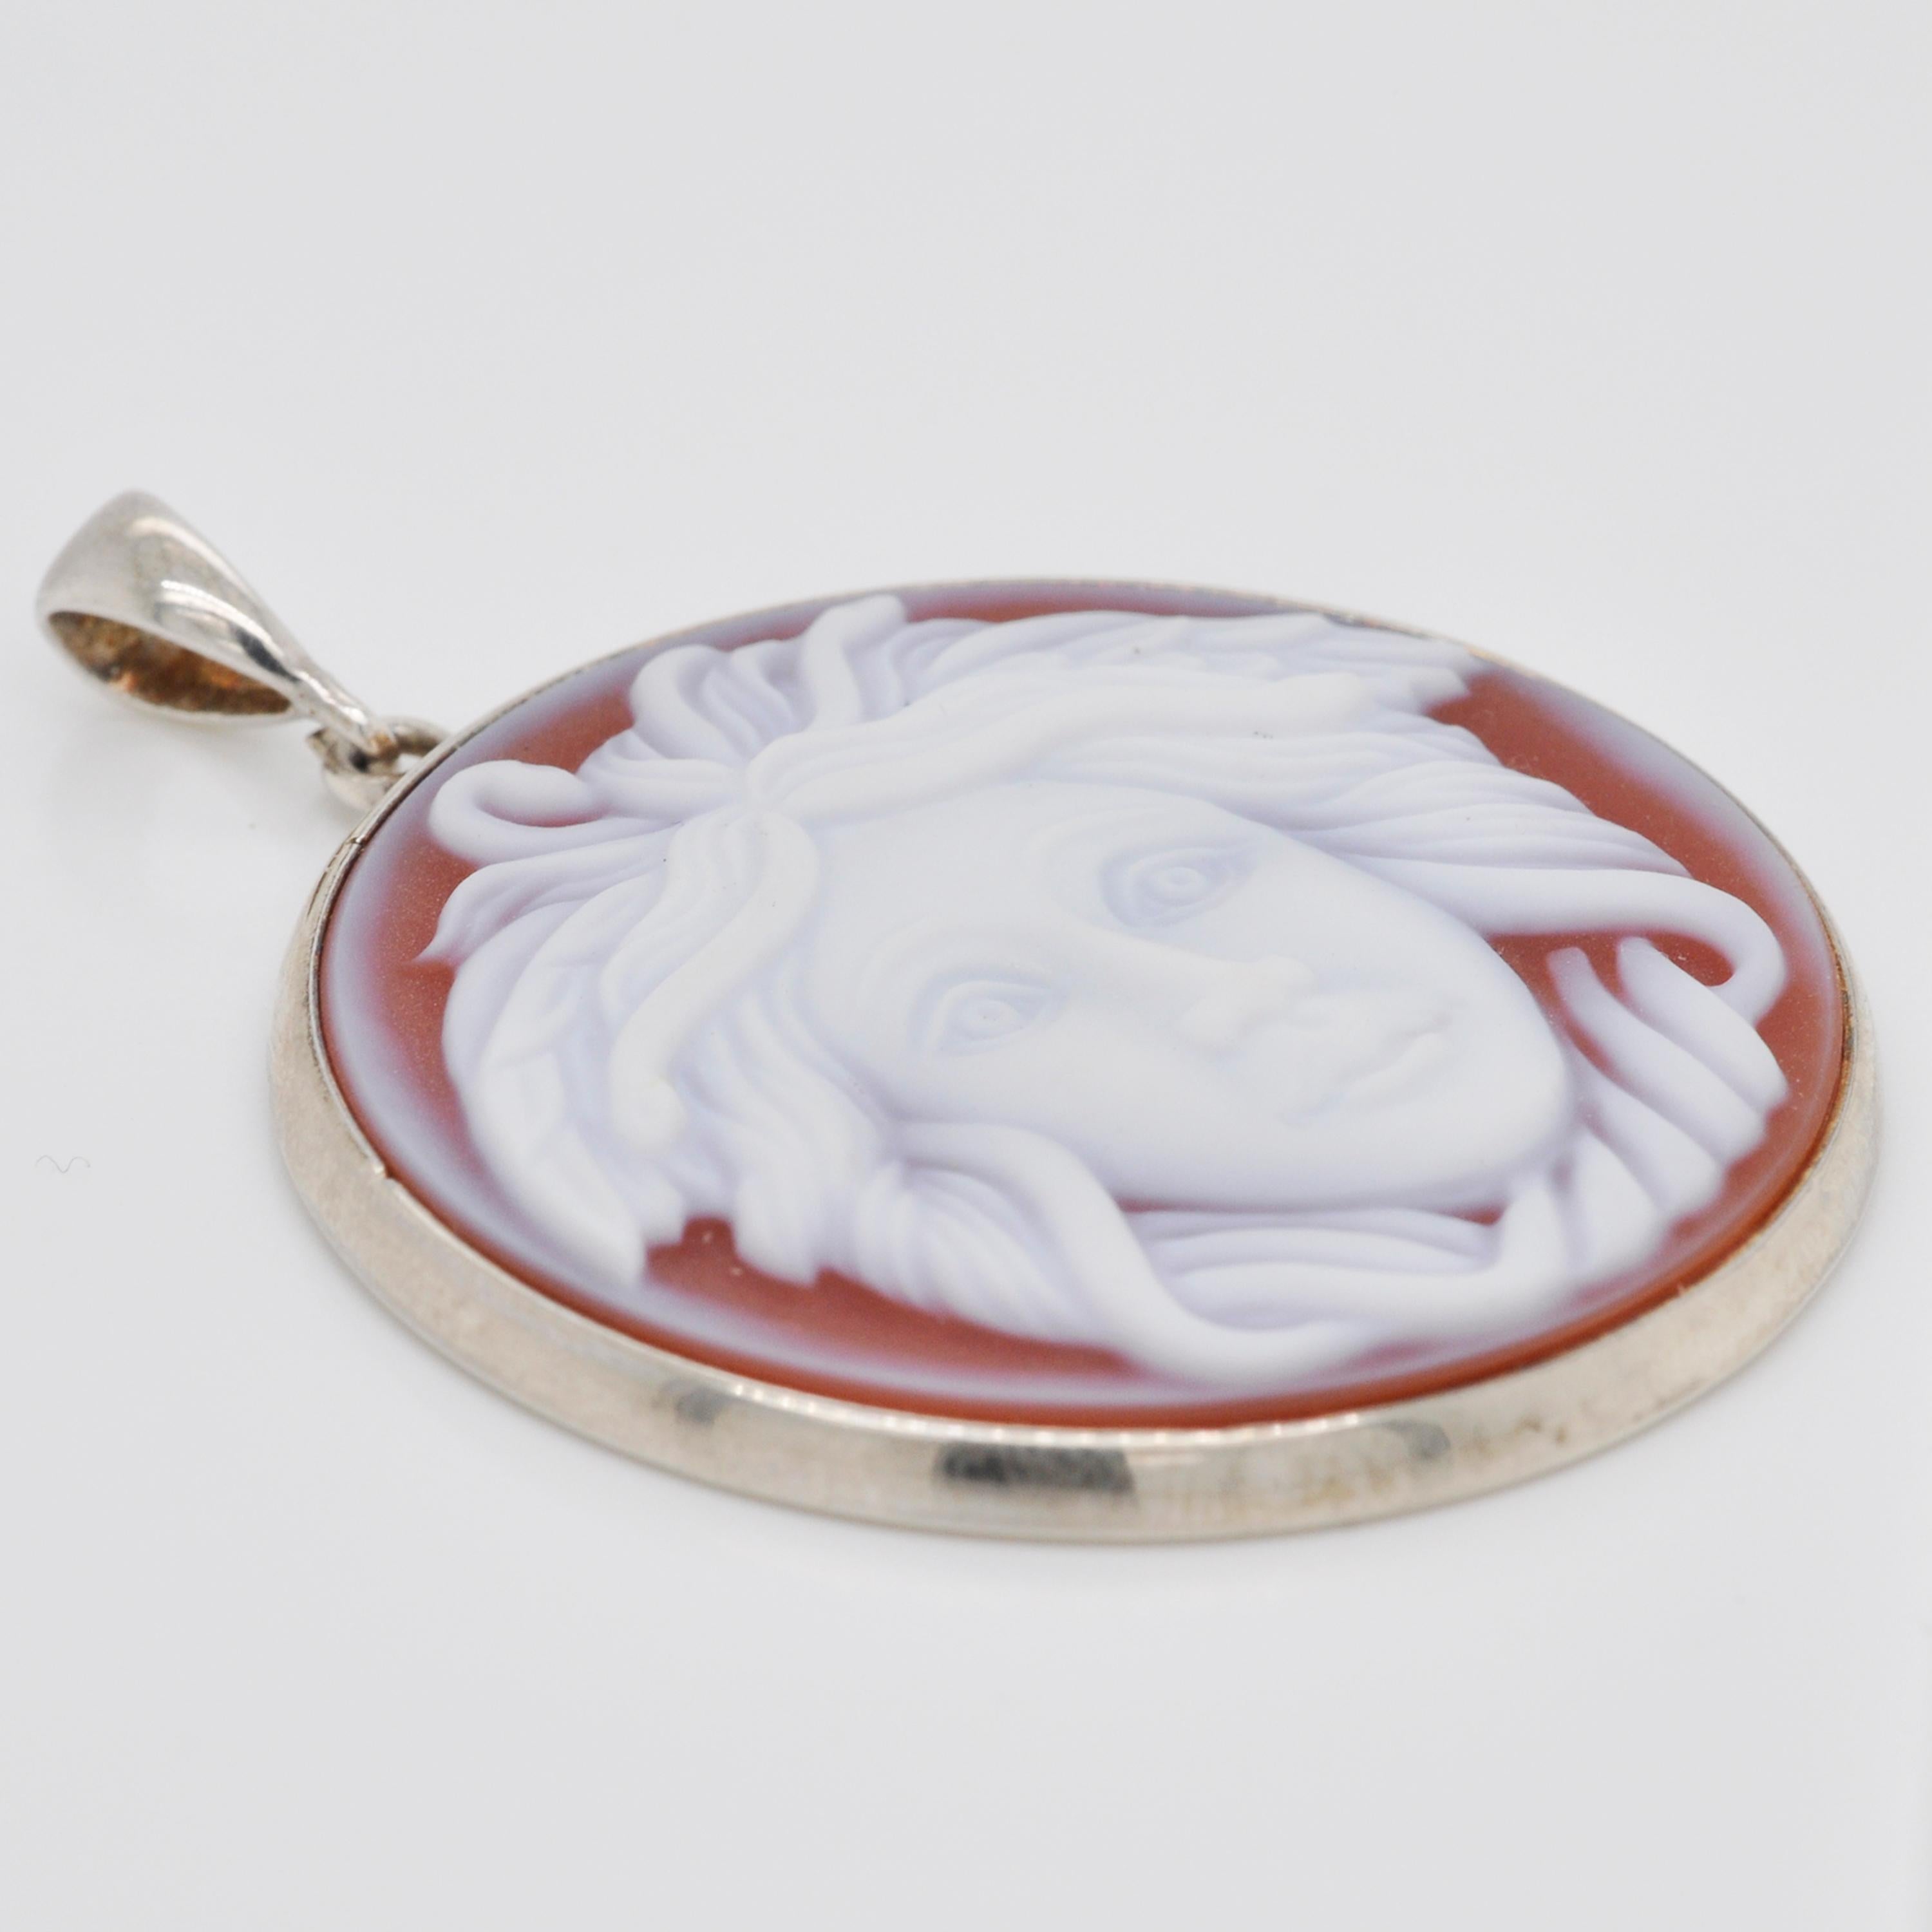 Mixed Cut Medusa Versace Carving Agate Cameo Sterling Silver Pendant Necklace For Sale